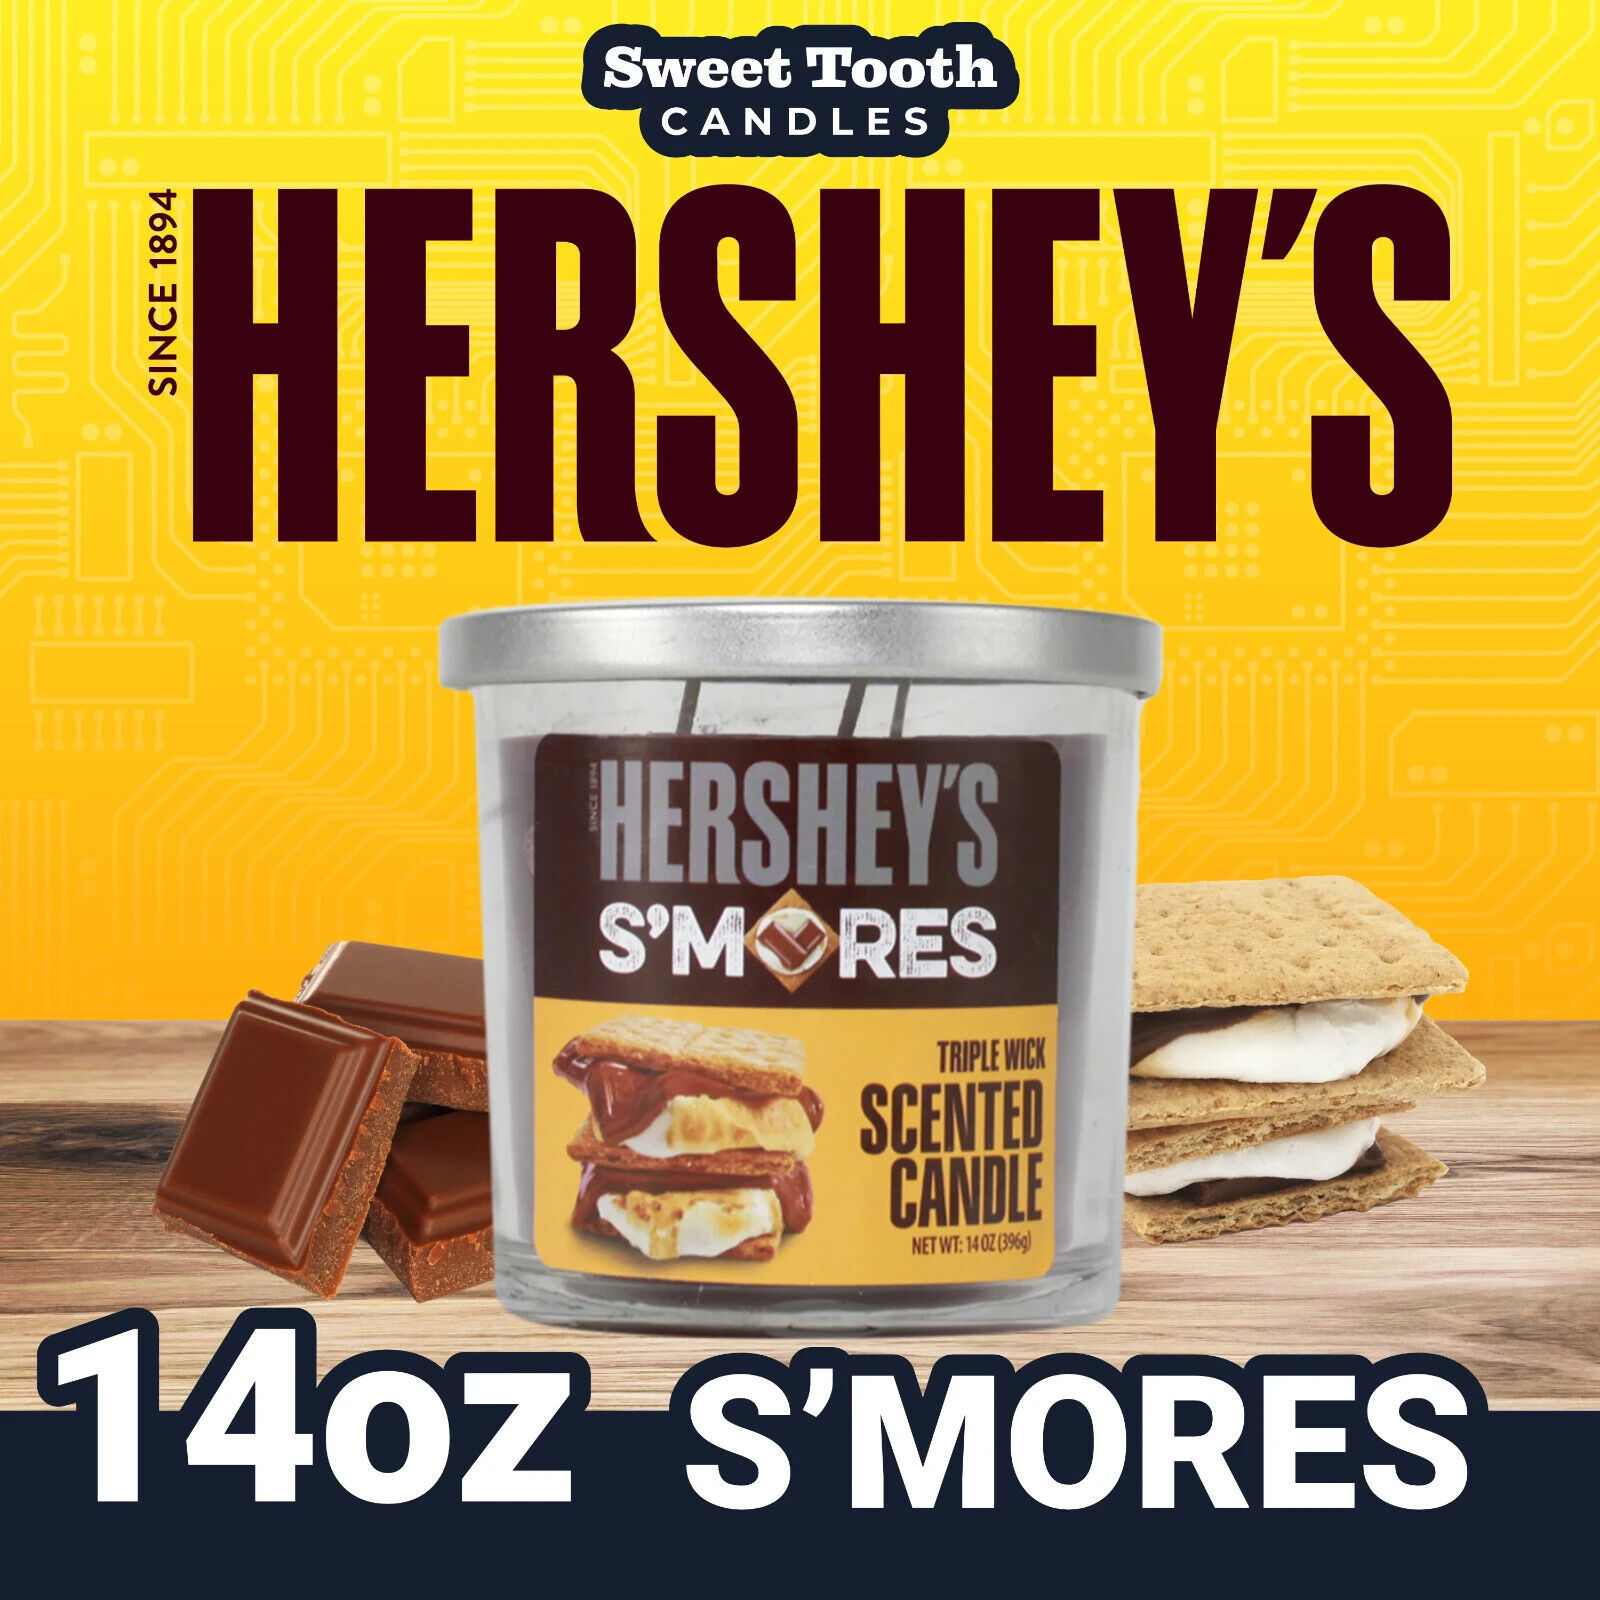 Candle - Hershey's S'mores Scented Candle 14oz -   HERSHEYS SMORES 14 OZ - $17.95